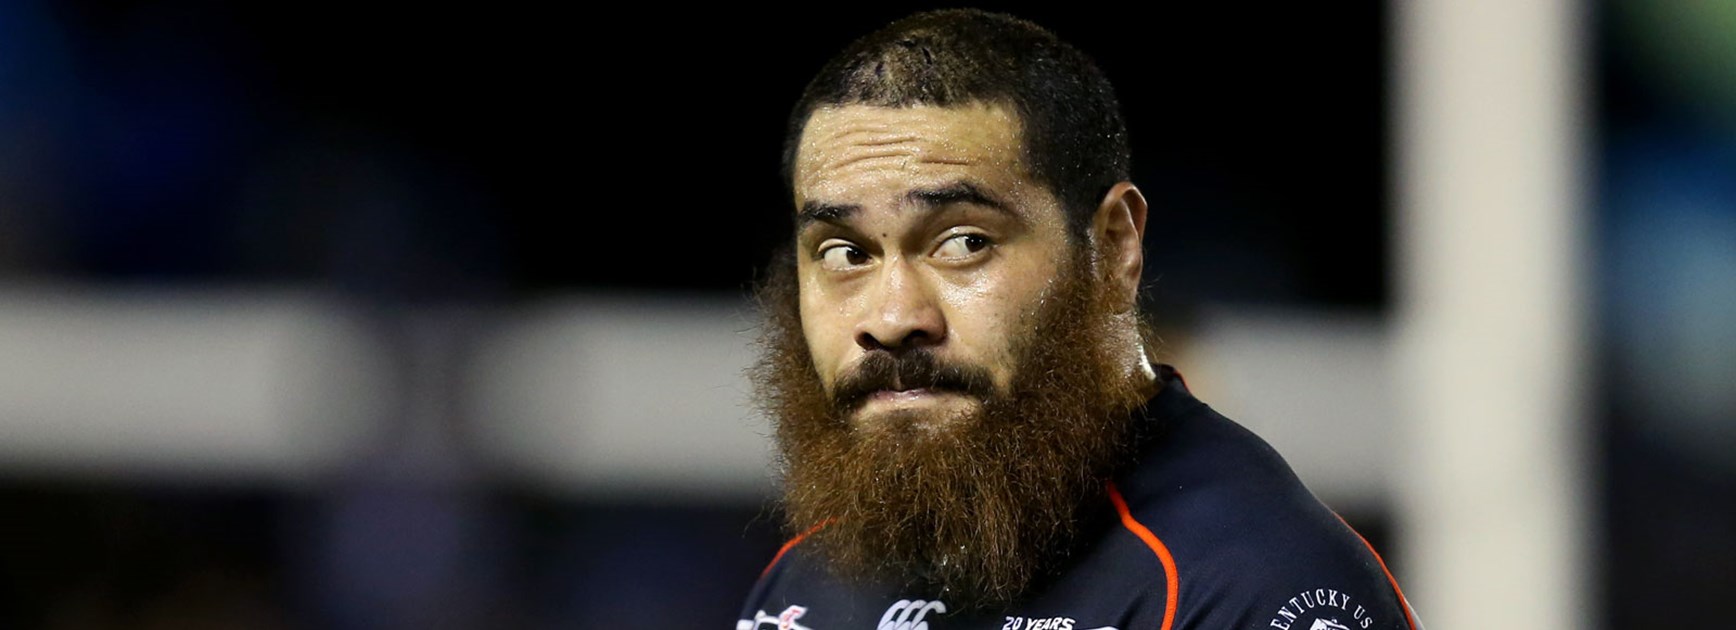 Konrad Hurrell is facing a month on the sidelines, charged by the NRL match review committee in Round 9.